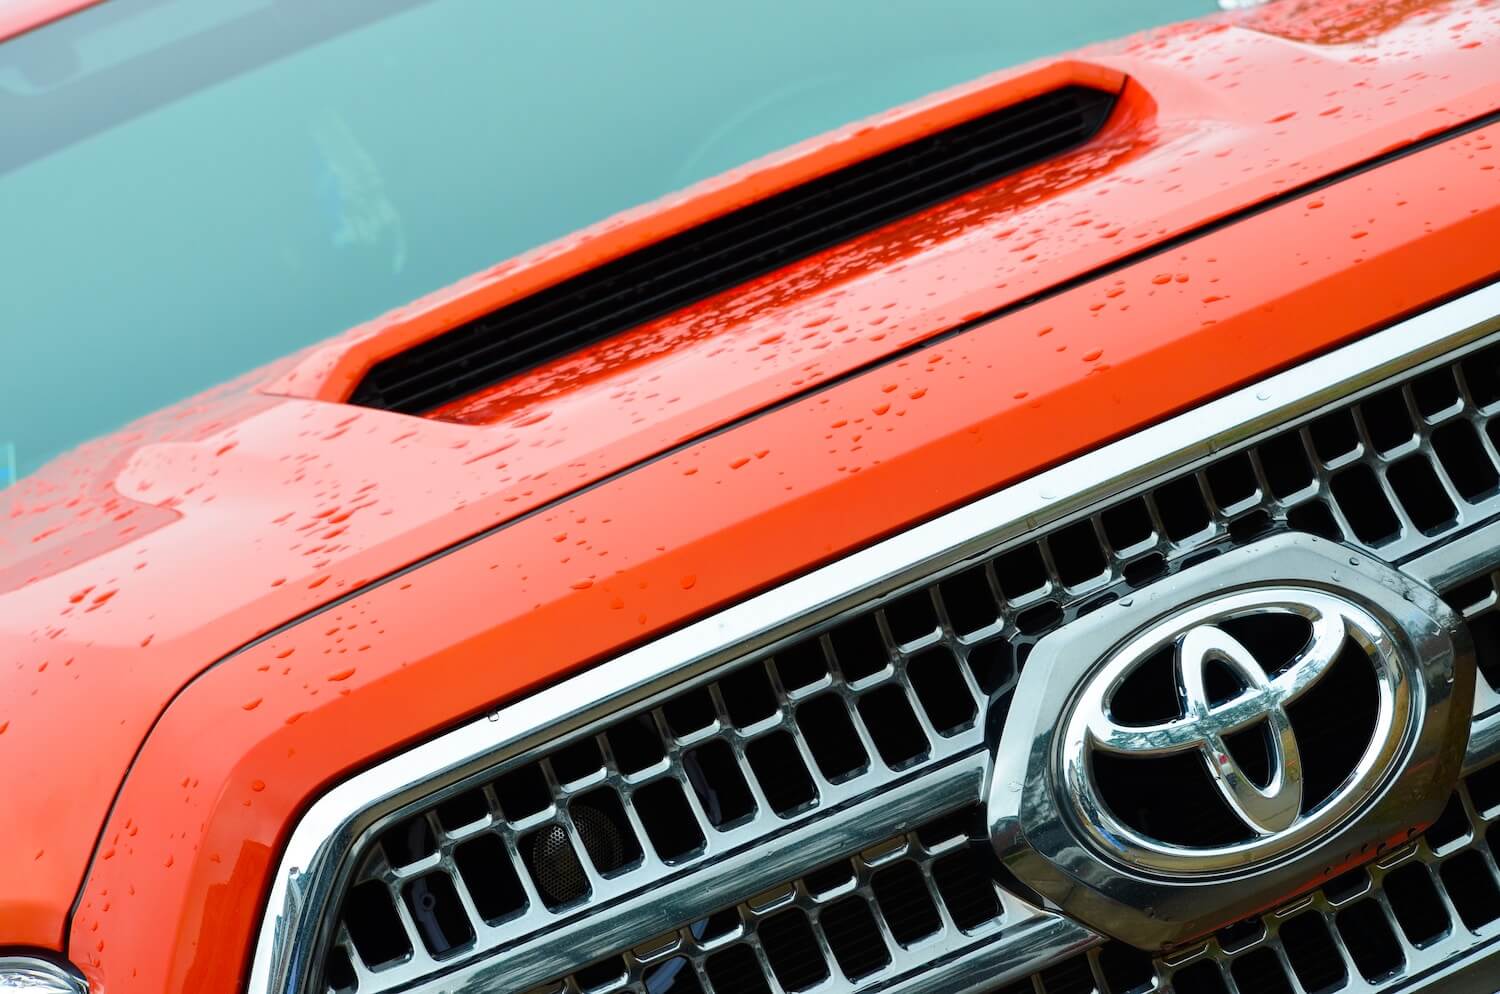 Closeup of the Toyota logo in the grille of an orange Tacoma pickup truck.